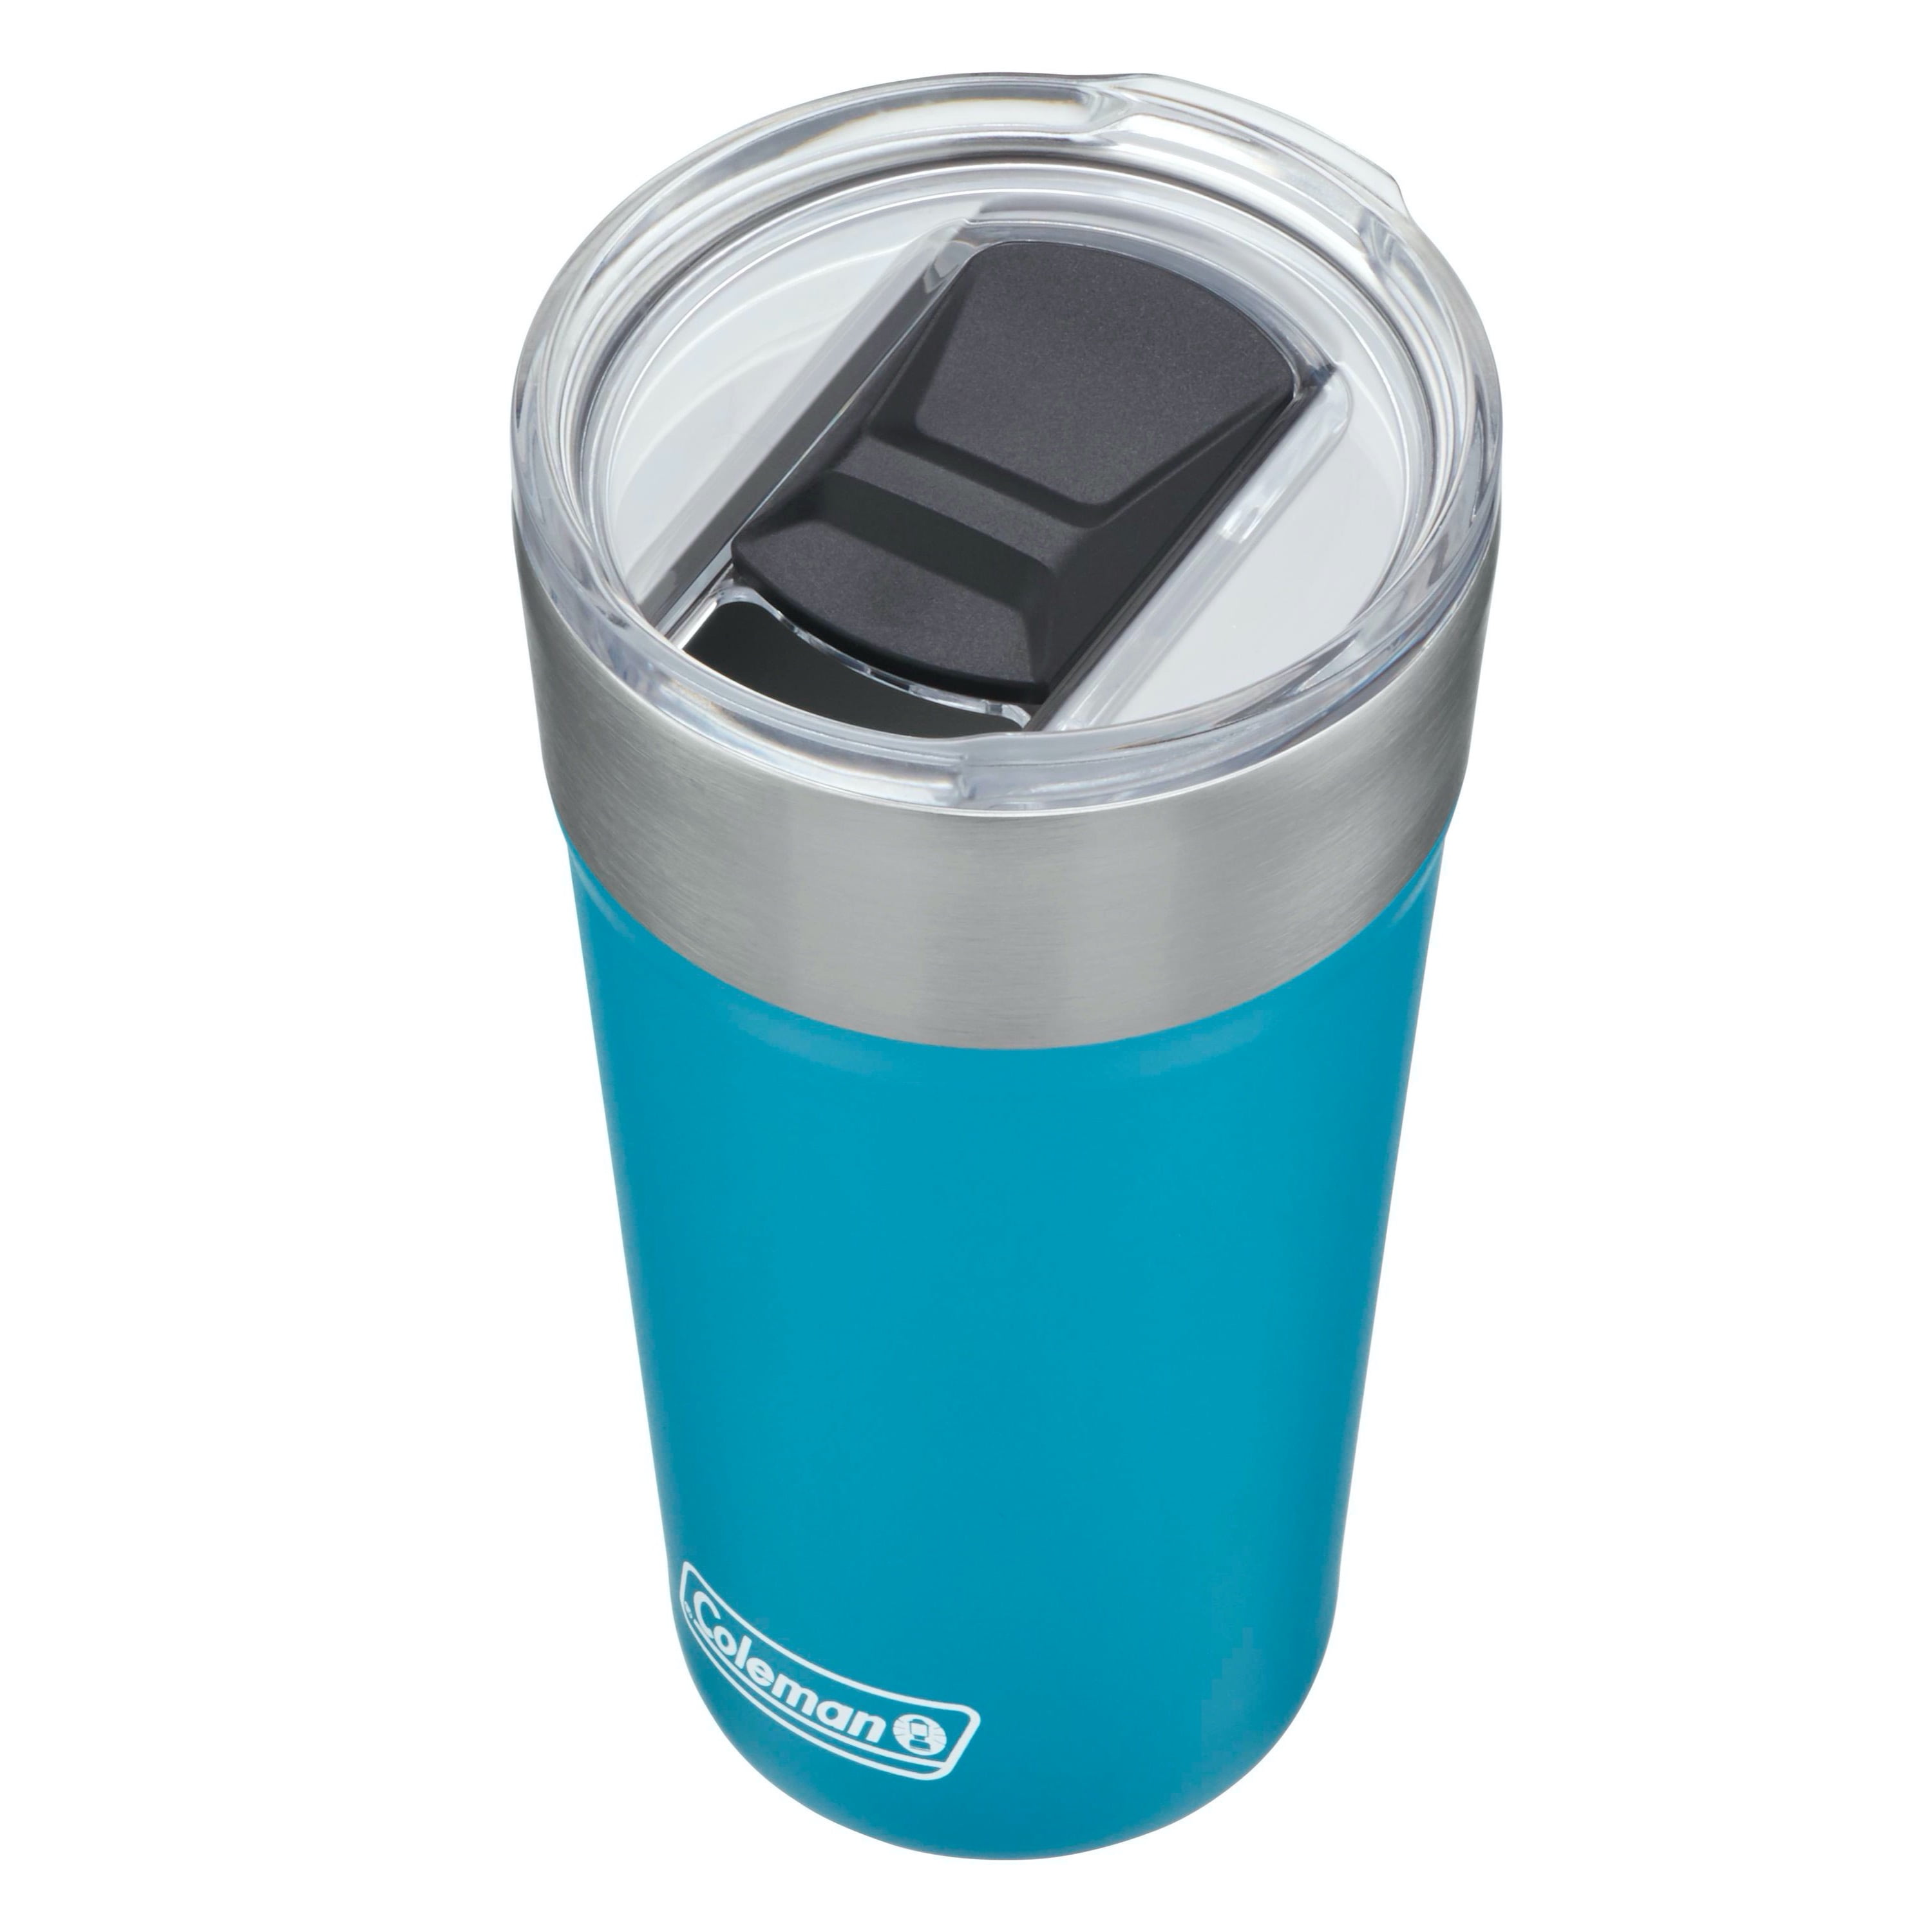 Coleman Brew 20-fl oz Stainless Steel Insulated Travel Mug at